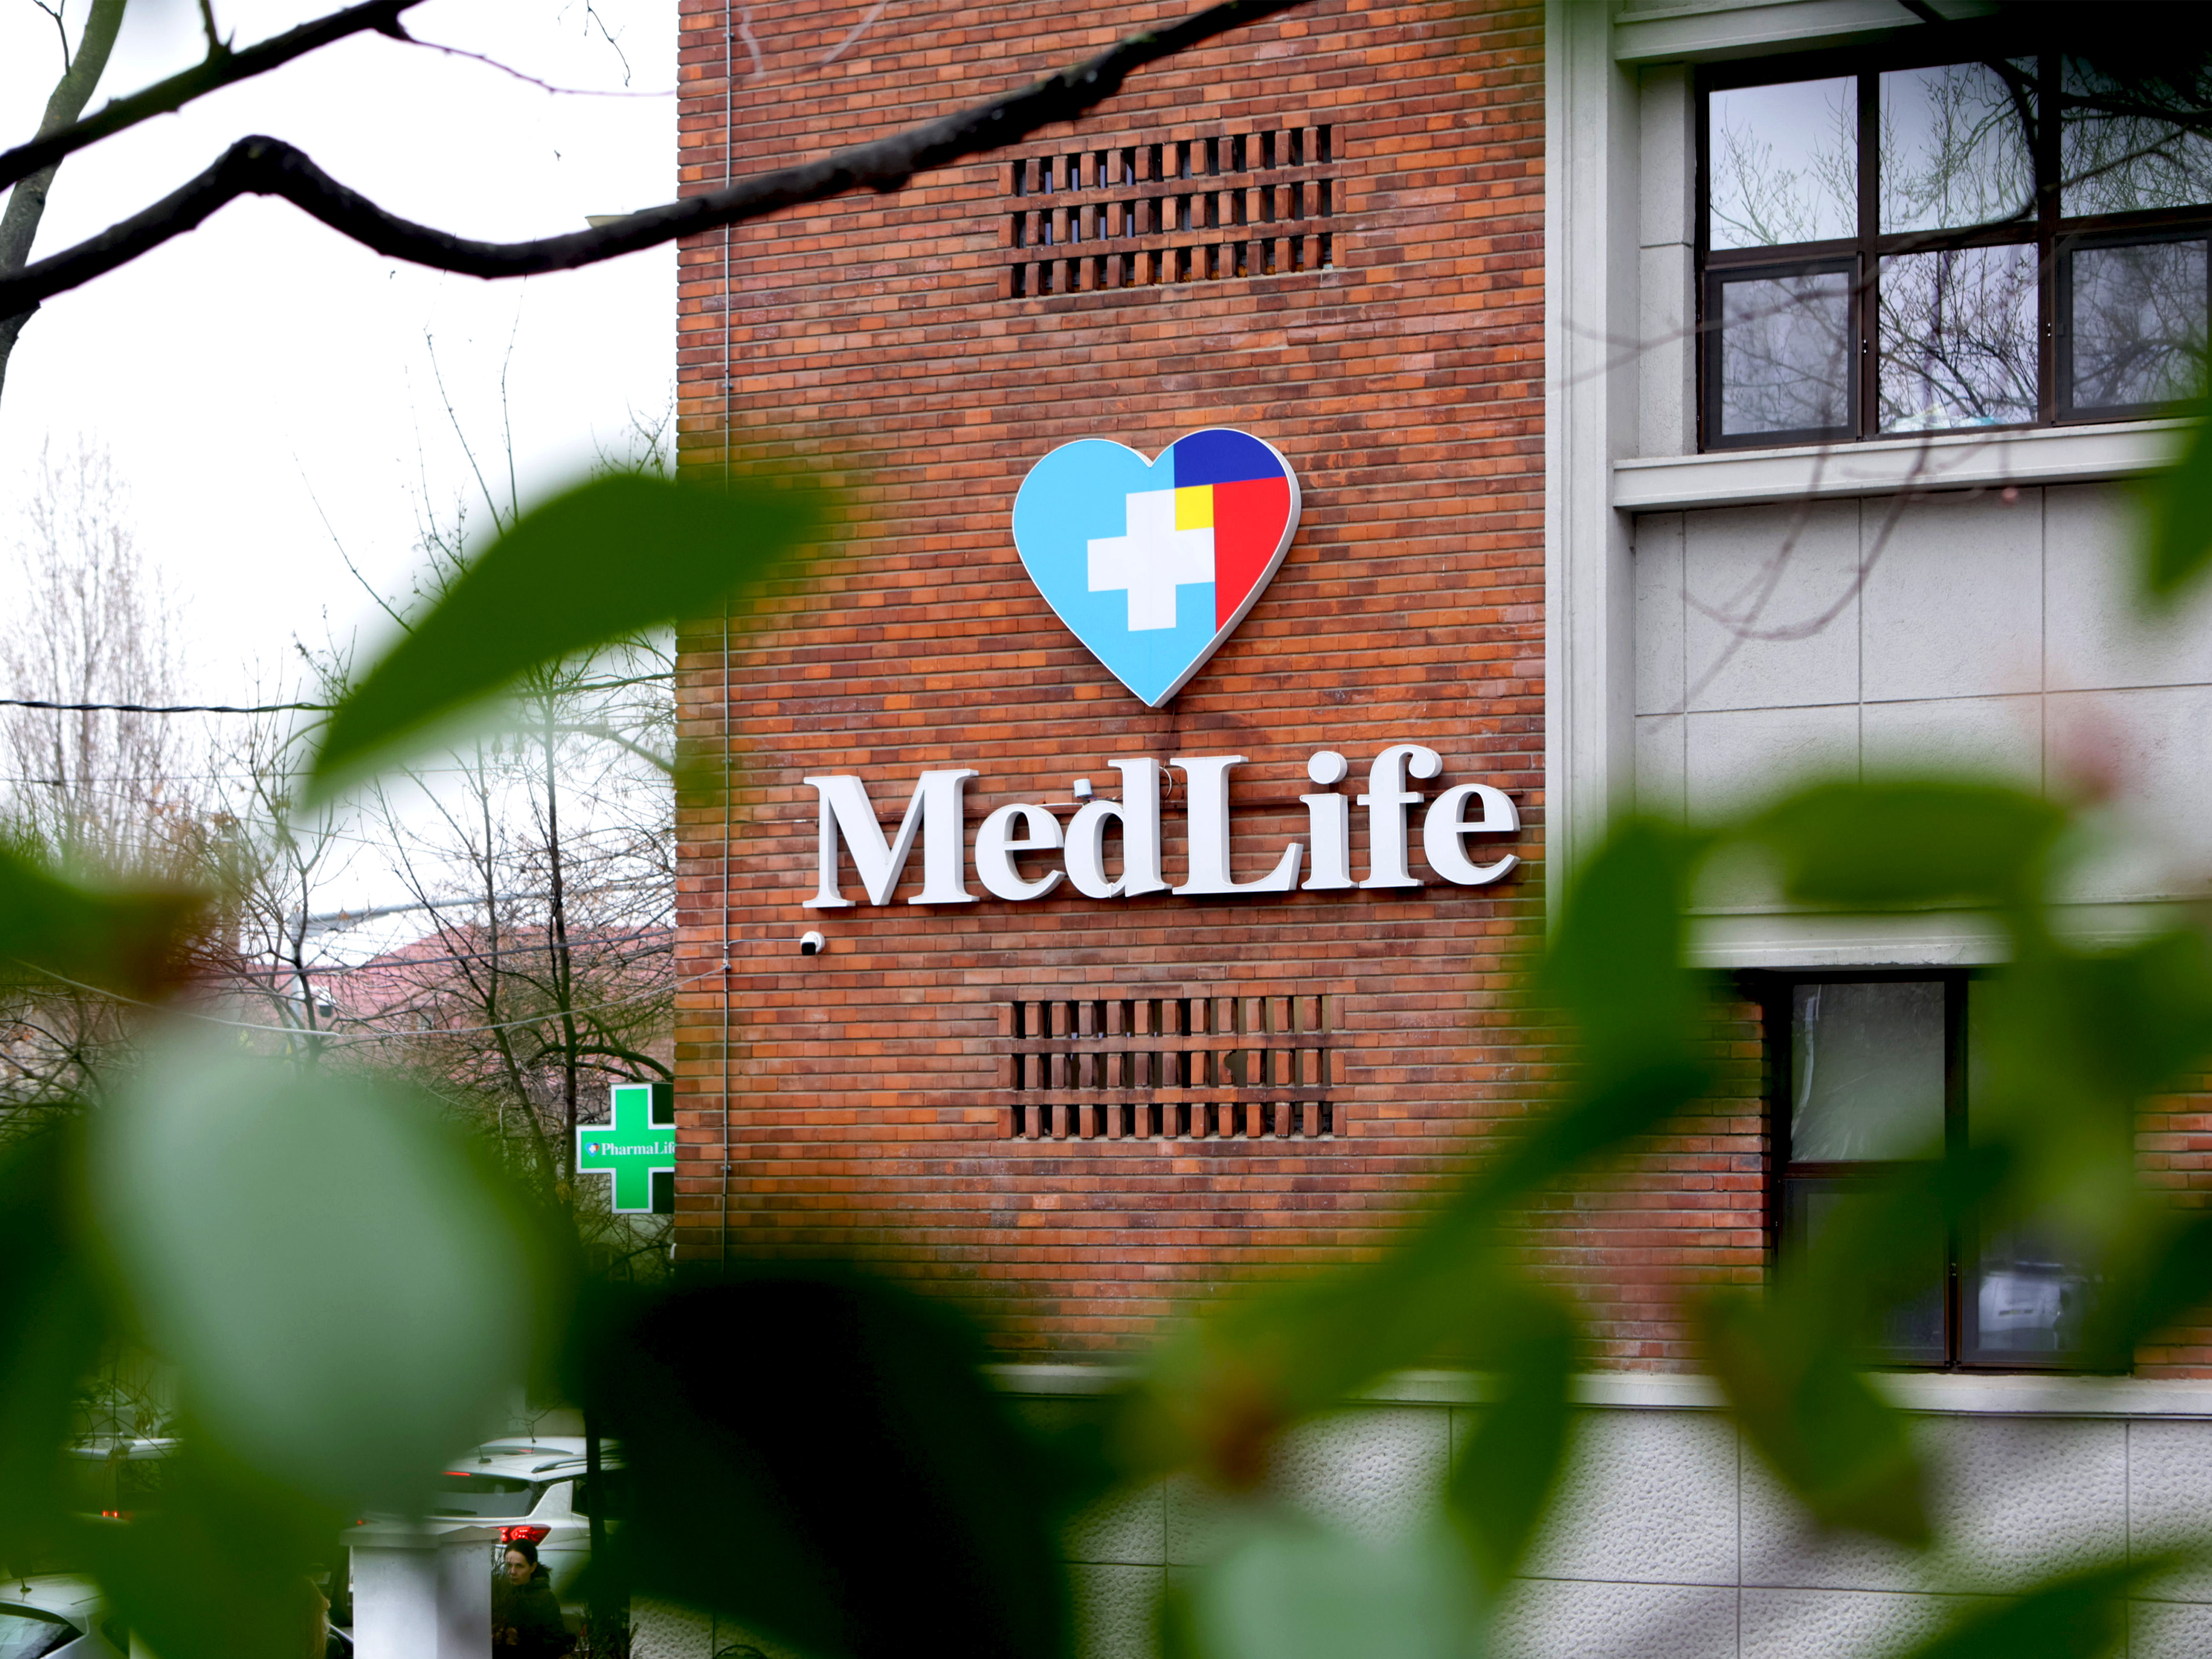 MedLife supplements syndicated loan with EUR 50 mln, to EUR 268.3 mln: “Keeping a cautious approach, the new funds will be used mainly for new acquisitions”